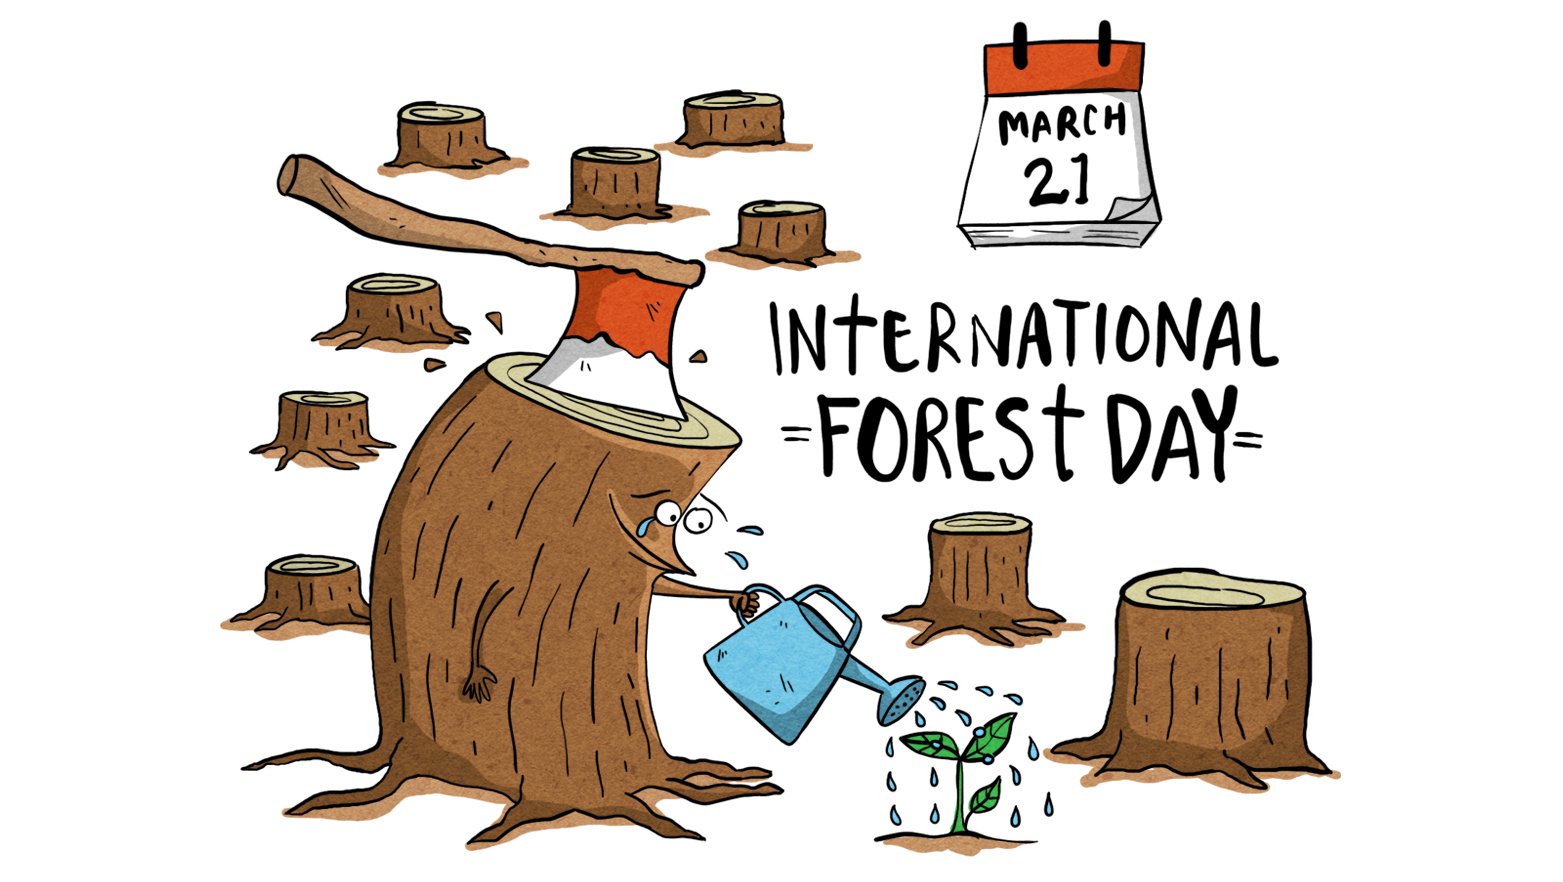 March 21: International Forest Day